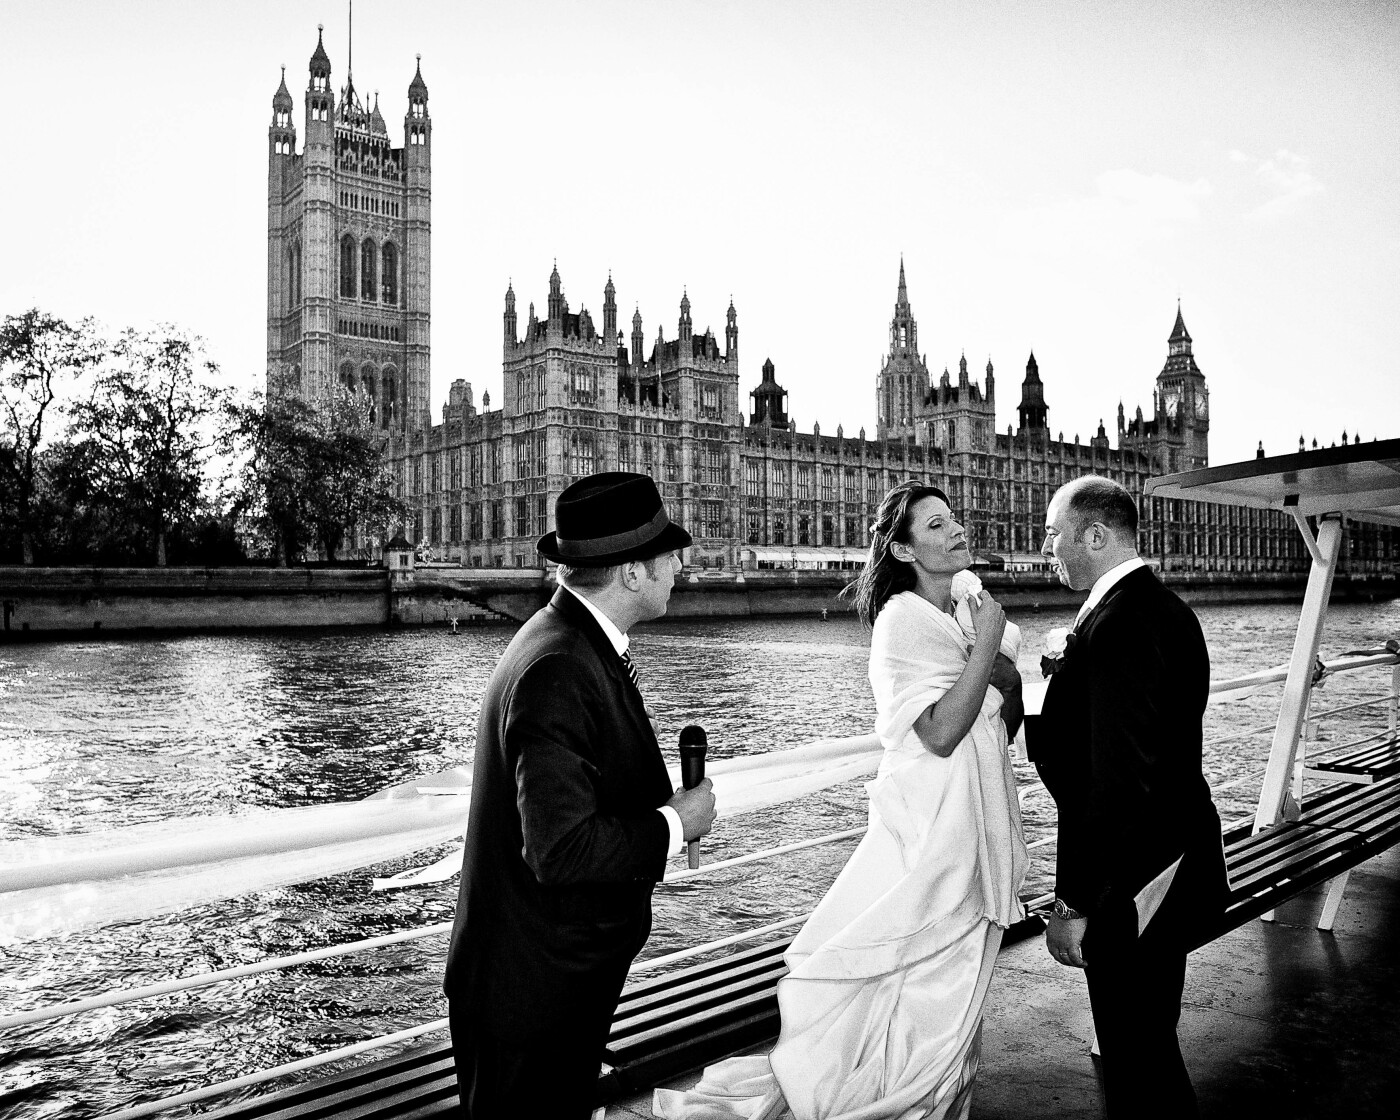 When I was booked to photograph Francesca and Julian’s wedding I knew it would be special and so it was. They hired a boat to held their reception in the River Thames, London and it was by the houses of parliament while their singer was singing a love song, that I was able to capture such a moving moment between the couple. Moments like this do not come very often and I was so glad I was there to capture it.